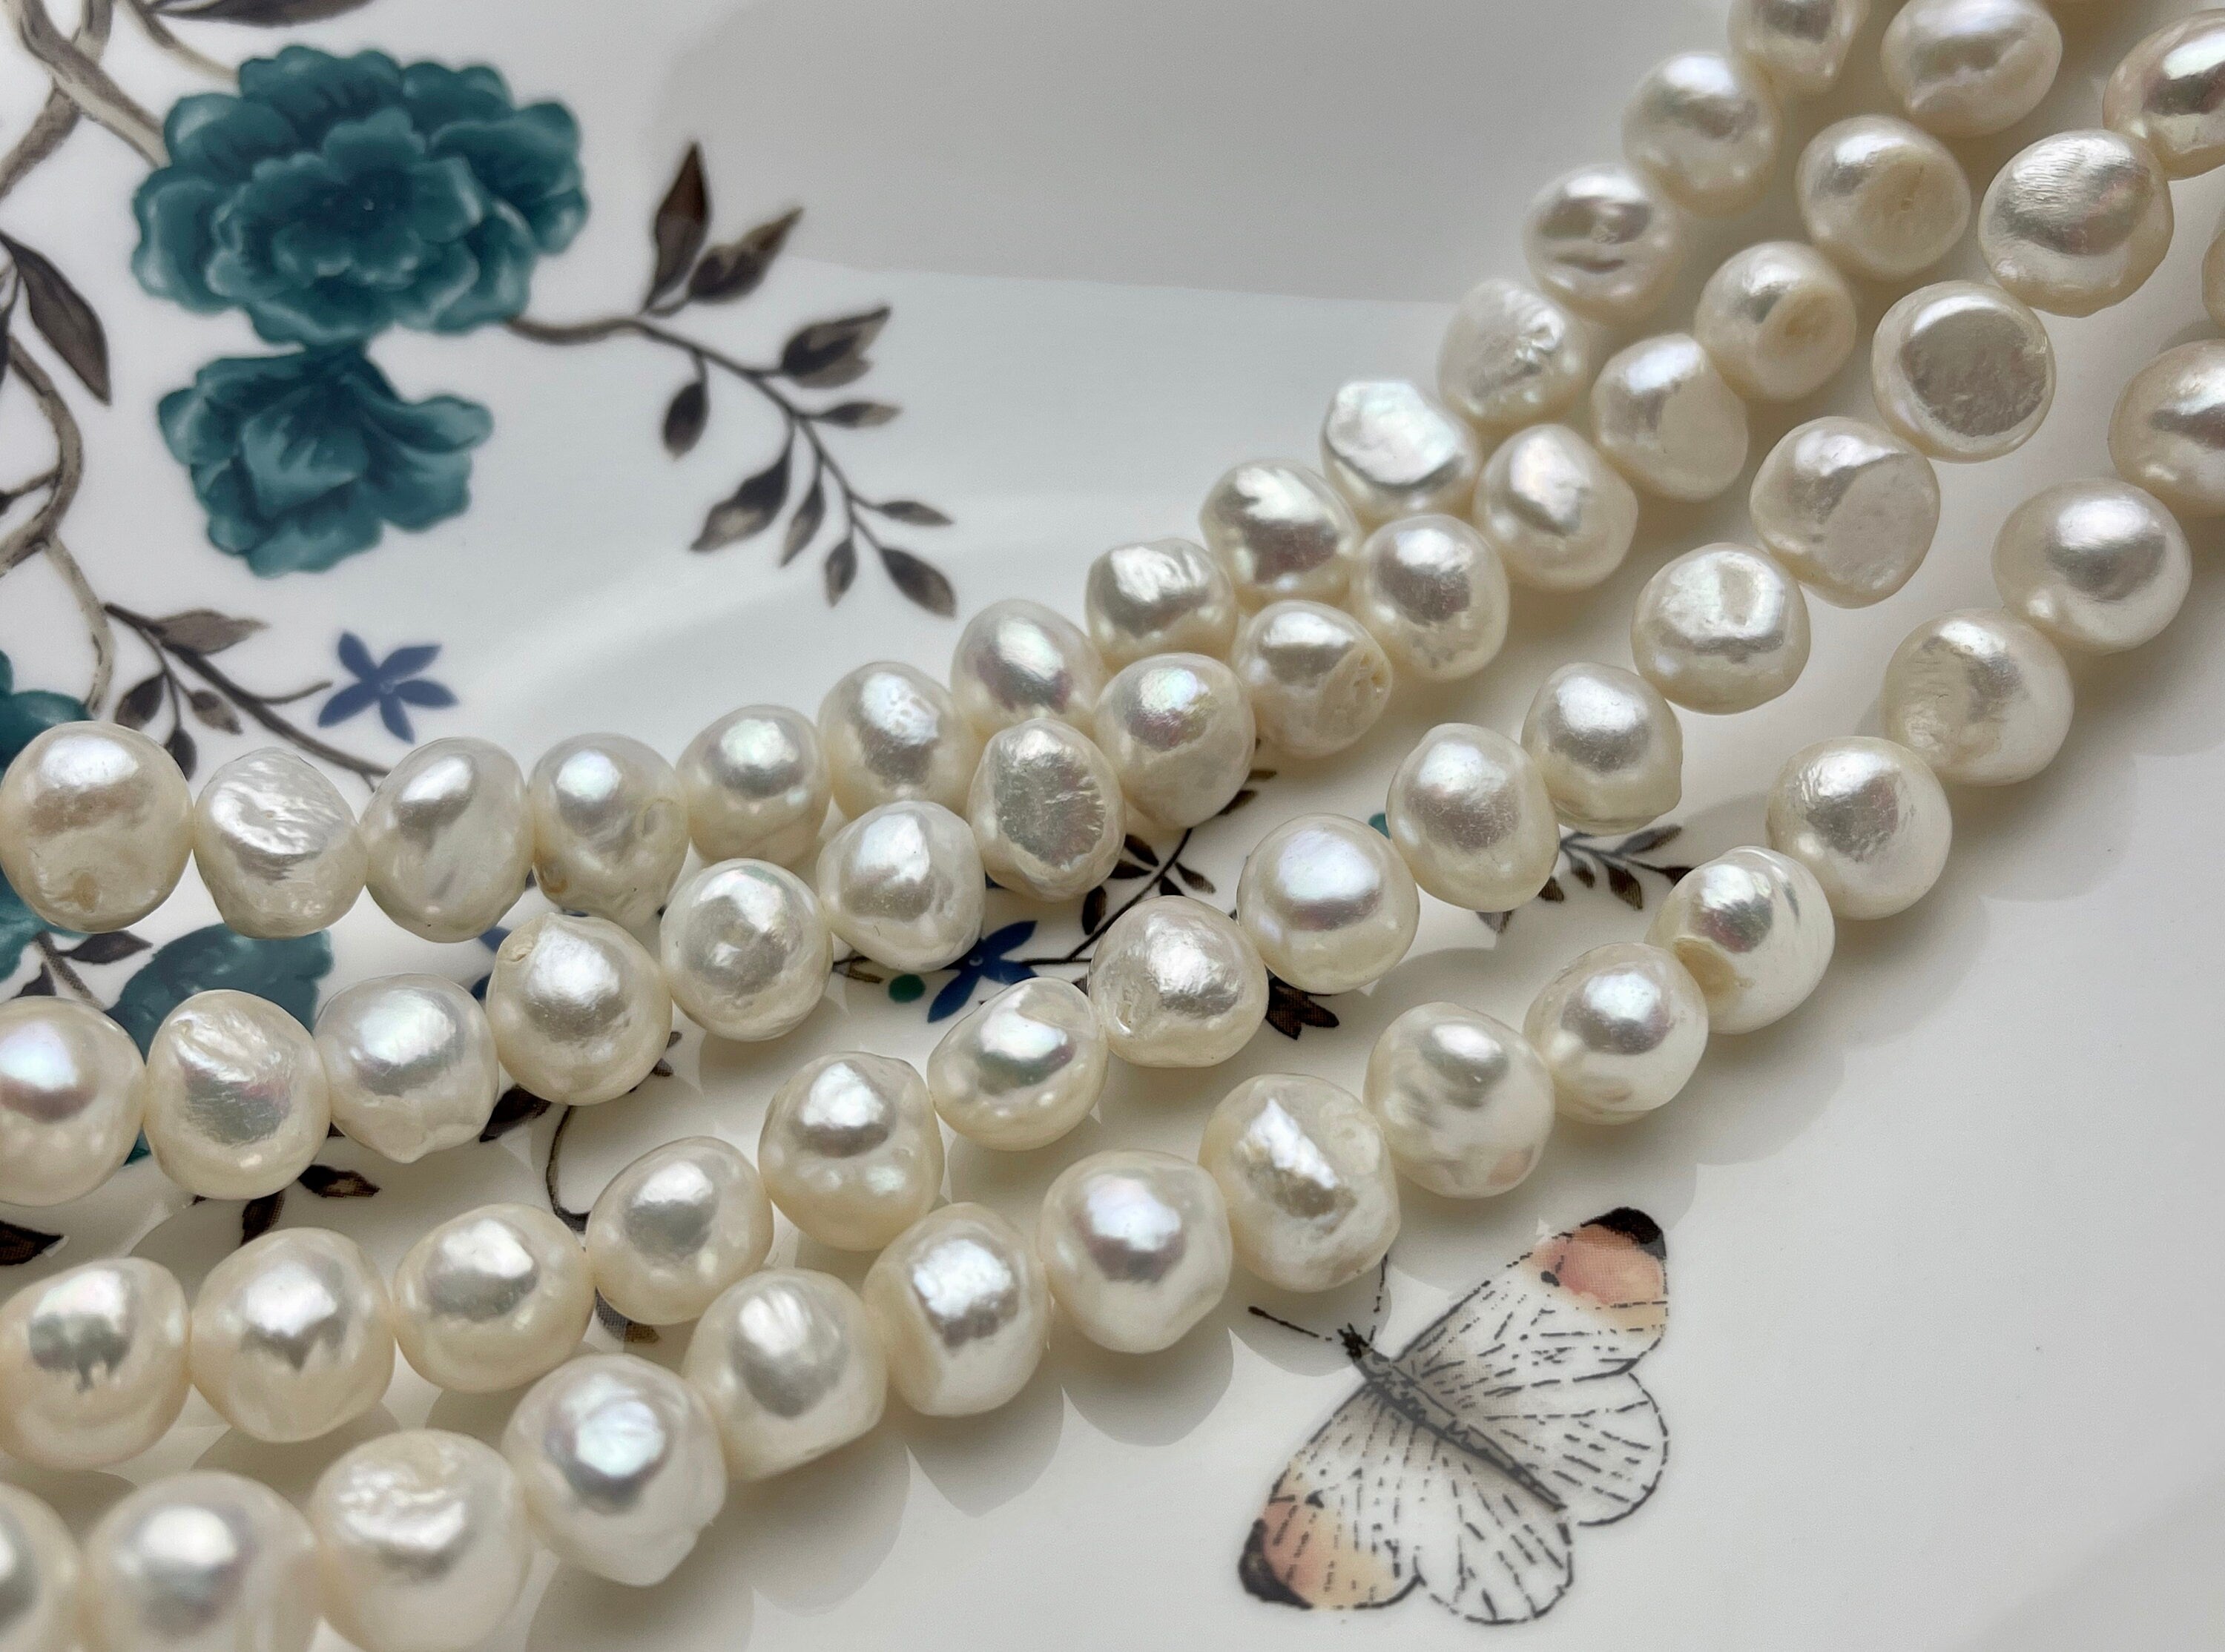 11-12mm wholesale round freshwater pearl beads, AA+ - pearl